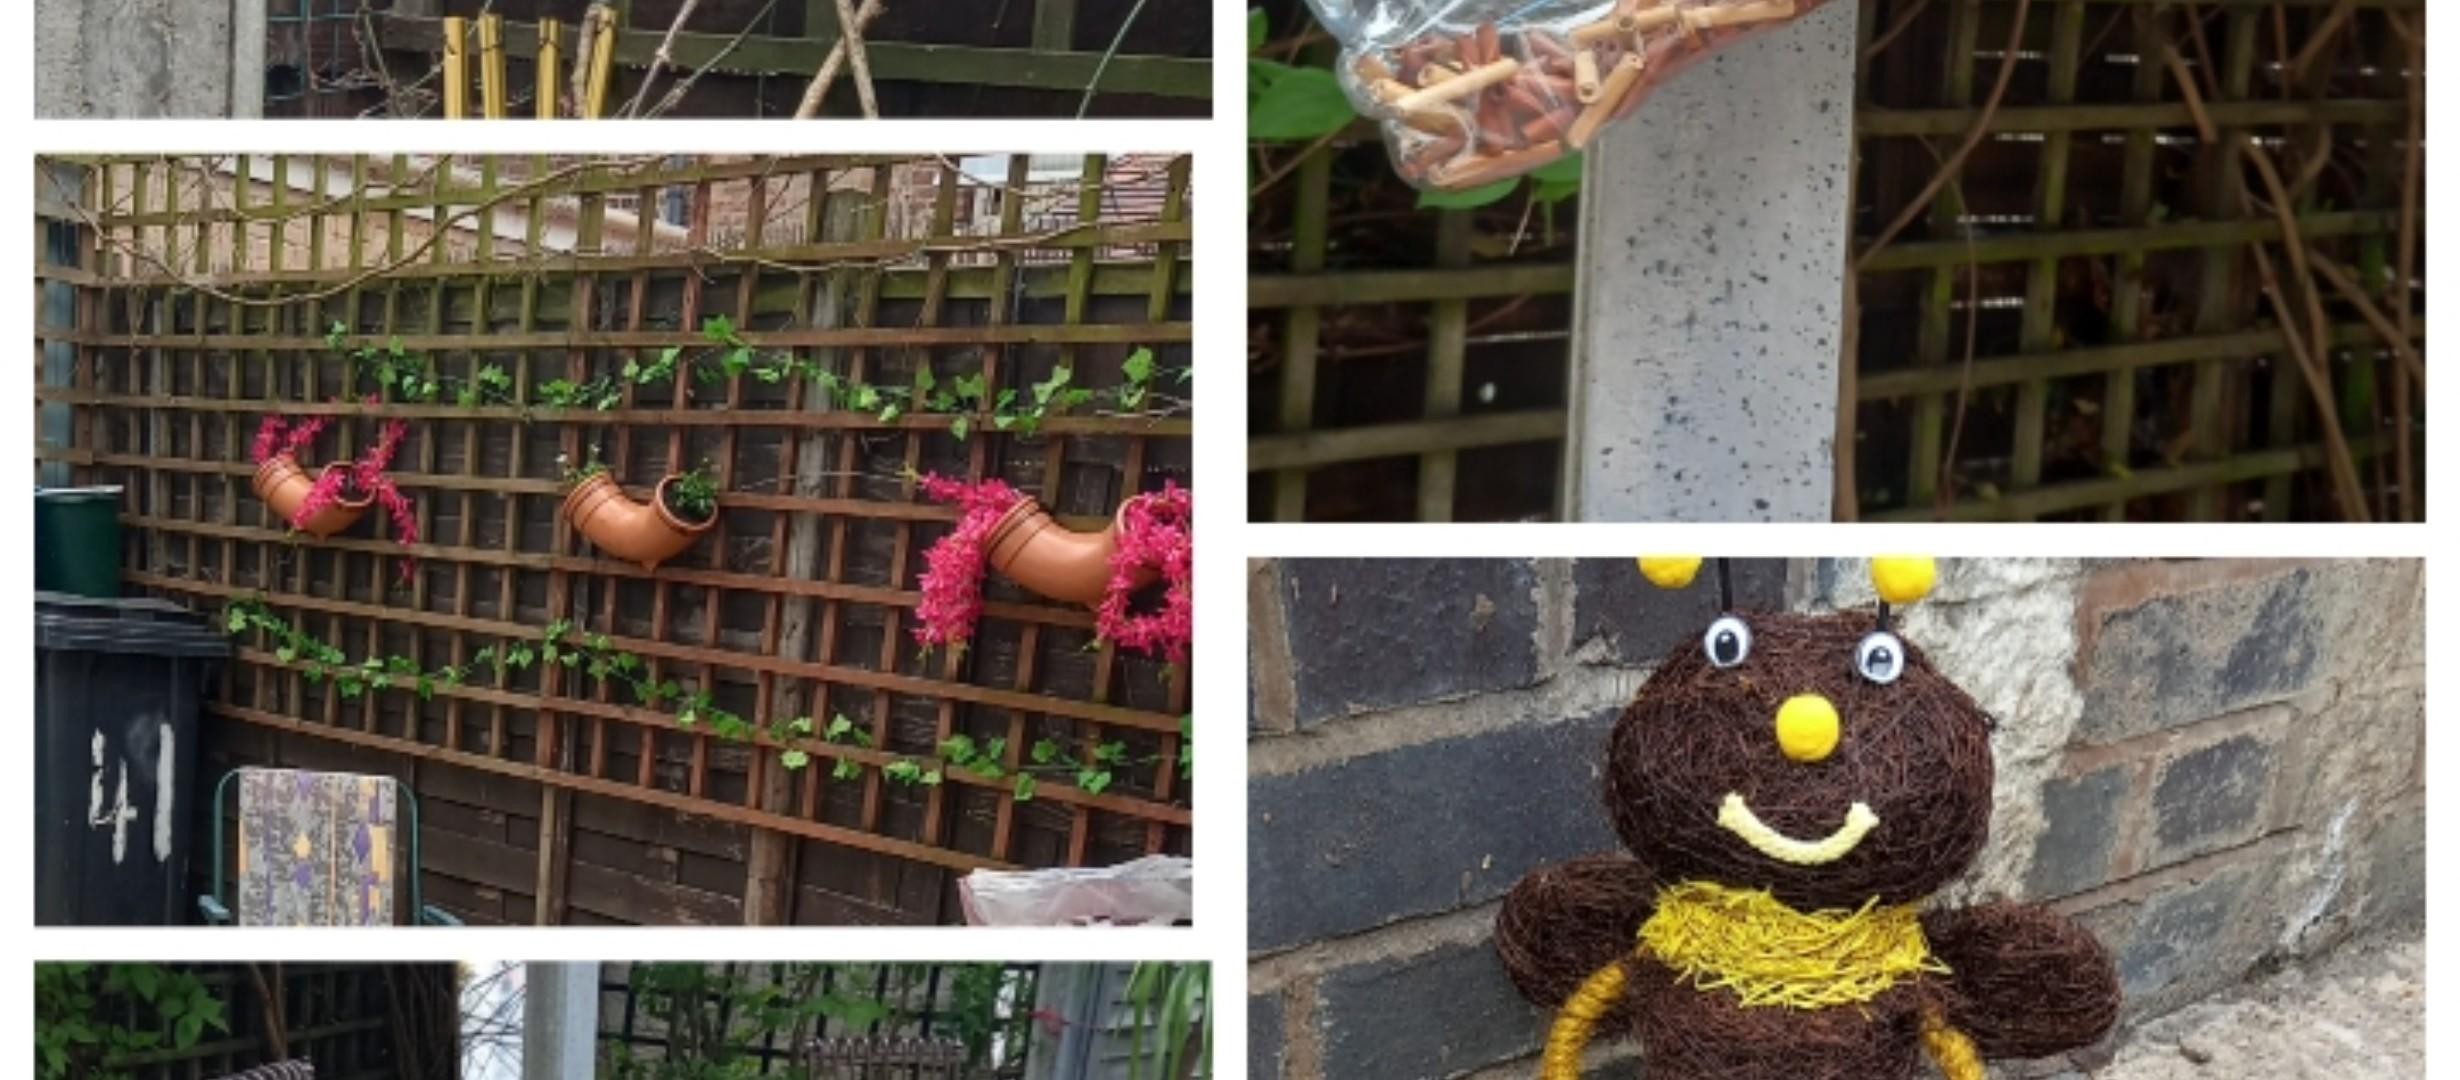 images of the Railway garden trellis and crafts